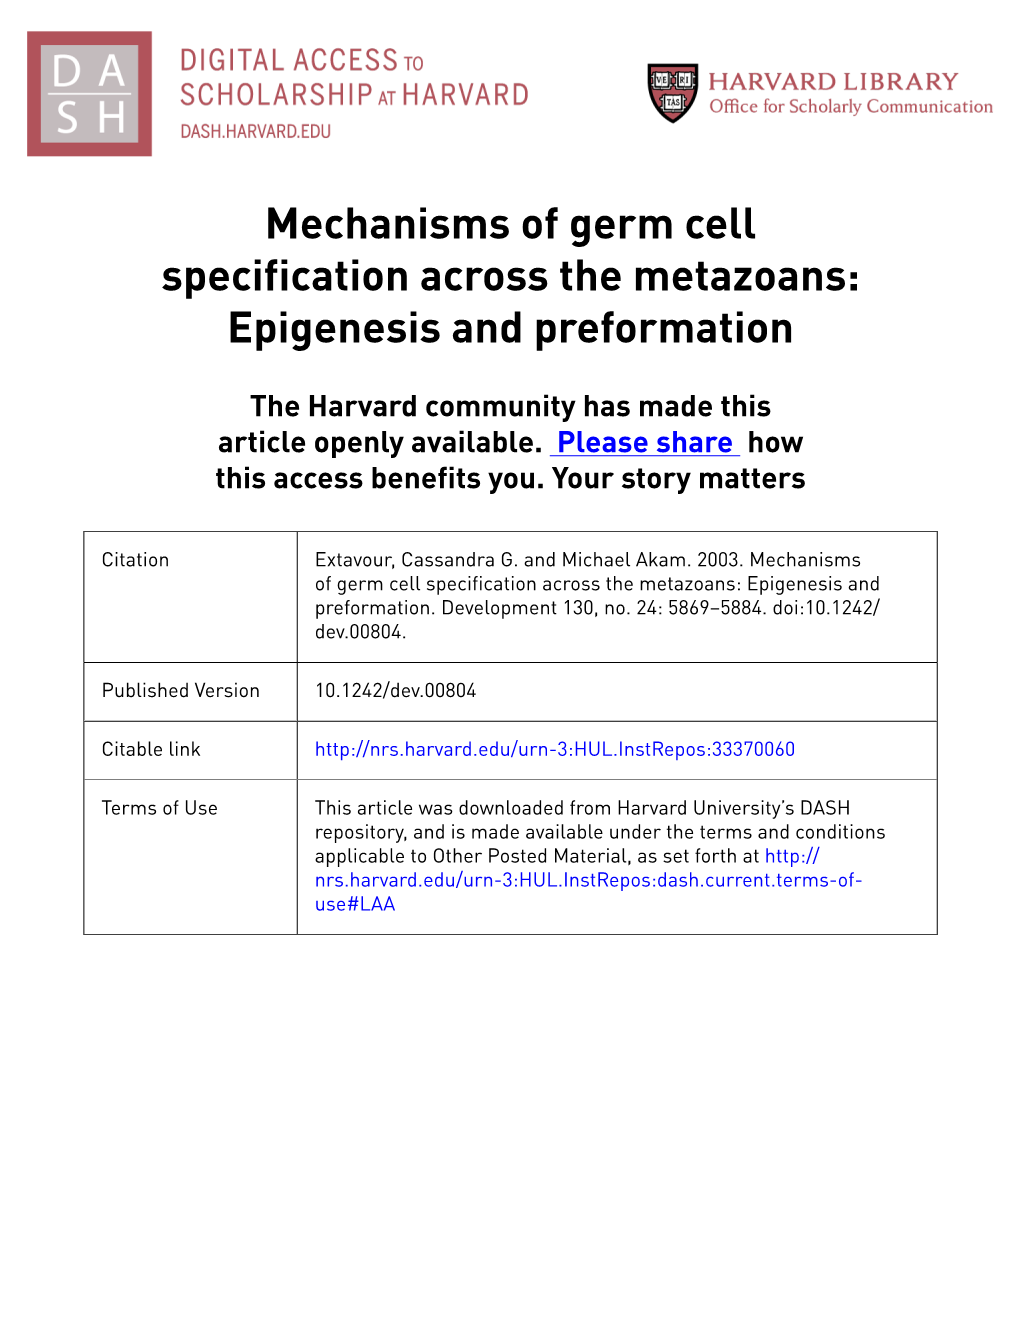 Mechanisms of Germ Cell Specification Across the Metazoans: Epigenesis and Preformation